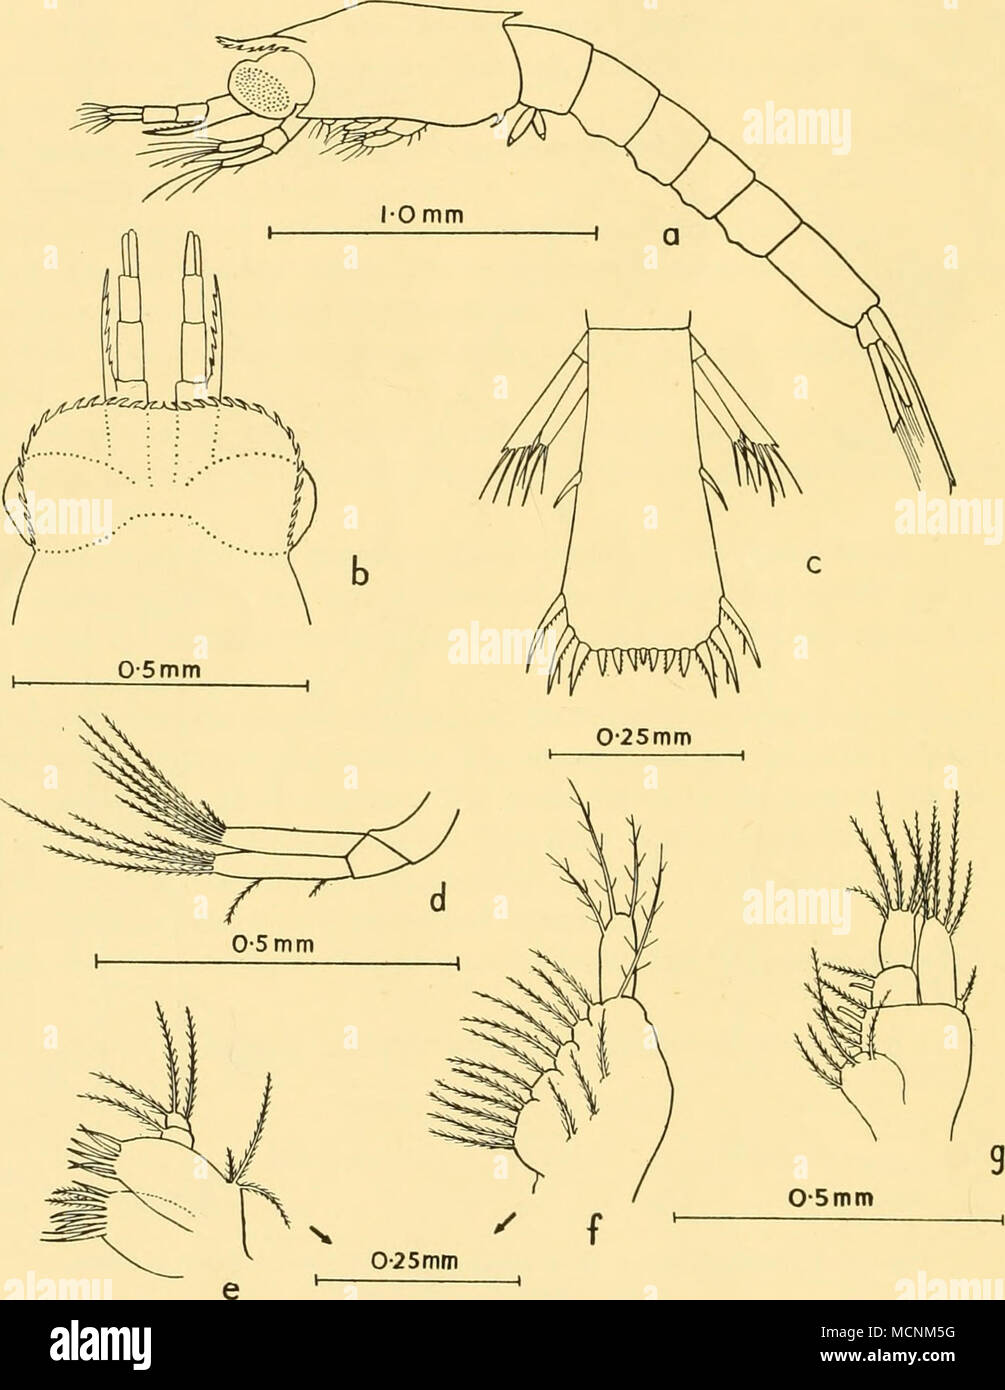 . F'g- I5- Euphausia lucens. a, first furcilia, lateral view; b, cephalothorax, dorsal view; c, telson and lateral uropods; d, second antenna; e, first maxilla; /, second maxilla; g, first cormopod. Second furcilia. Three specimens were found (Fig. 160, b). The average length was 3-5 mm. The anterior margin of the carapace has narrowed to a finely serrated frontal plate. The posterior margin is no longer produced as a dorsal spine, but the inferior margin retains its denticle. The rather small eyes project considerably beyond the margins of the frontal plate. The first and second antennae are  Stock Photo